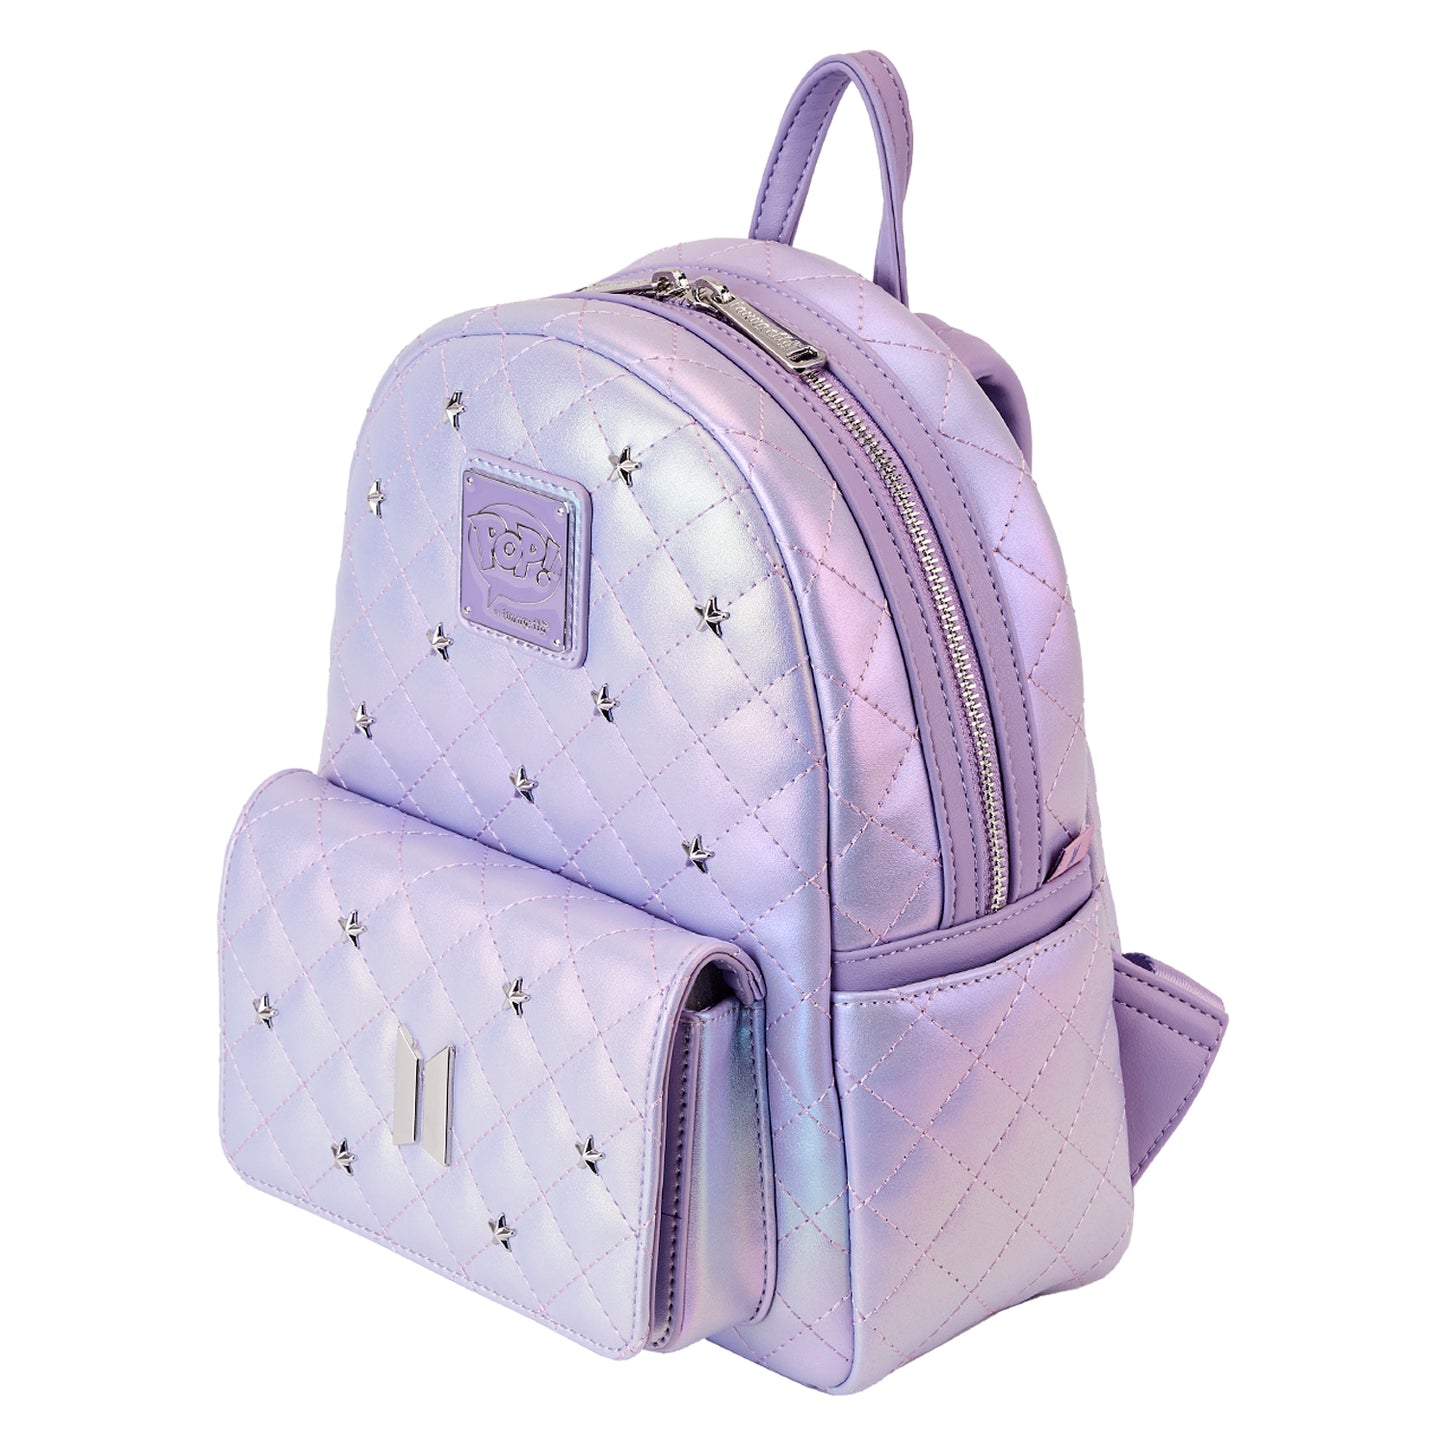 Funko Pop! By Loungefly BTS Logo Iridescent Purple Mini Backpack -  **PREORDER**